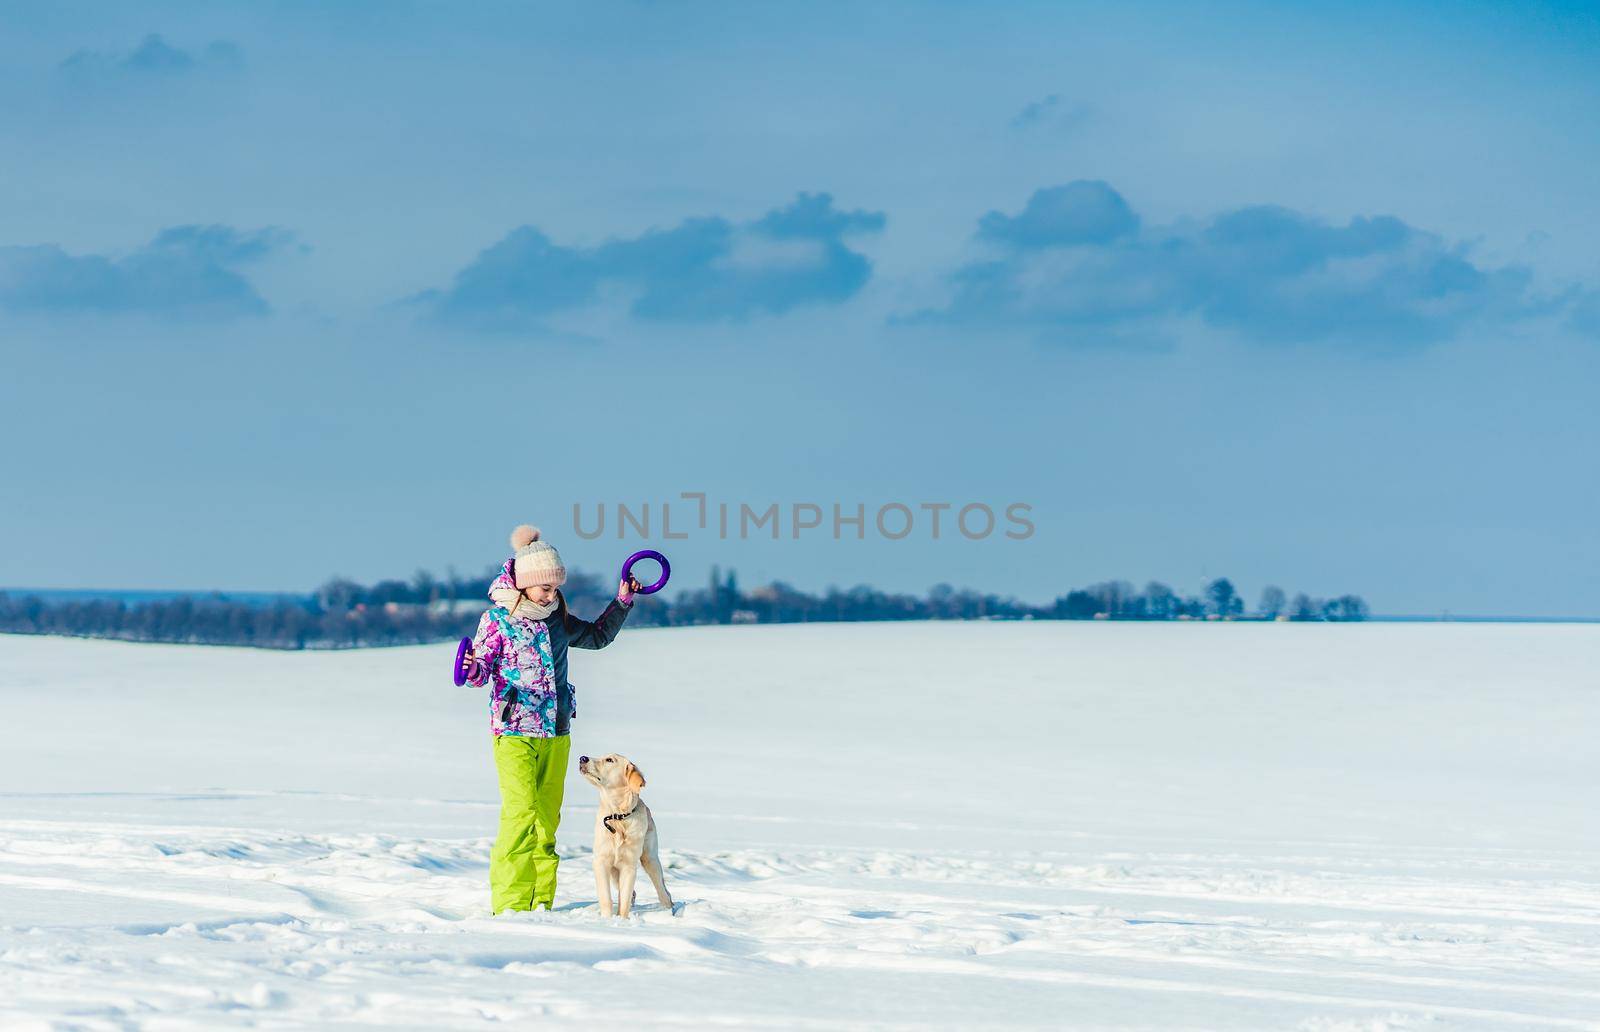 Cute girl playing with adorable dog on snowy field